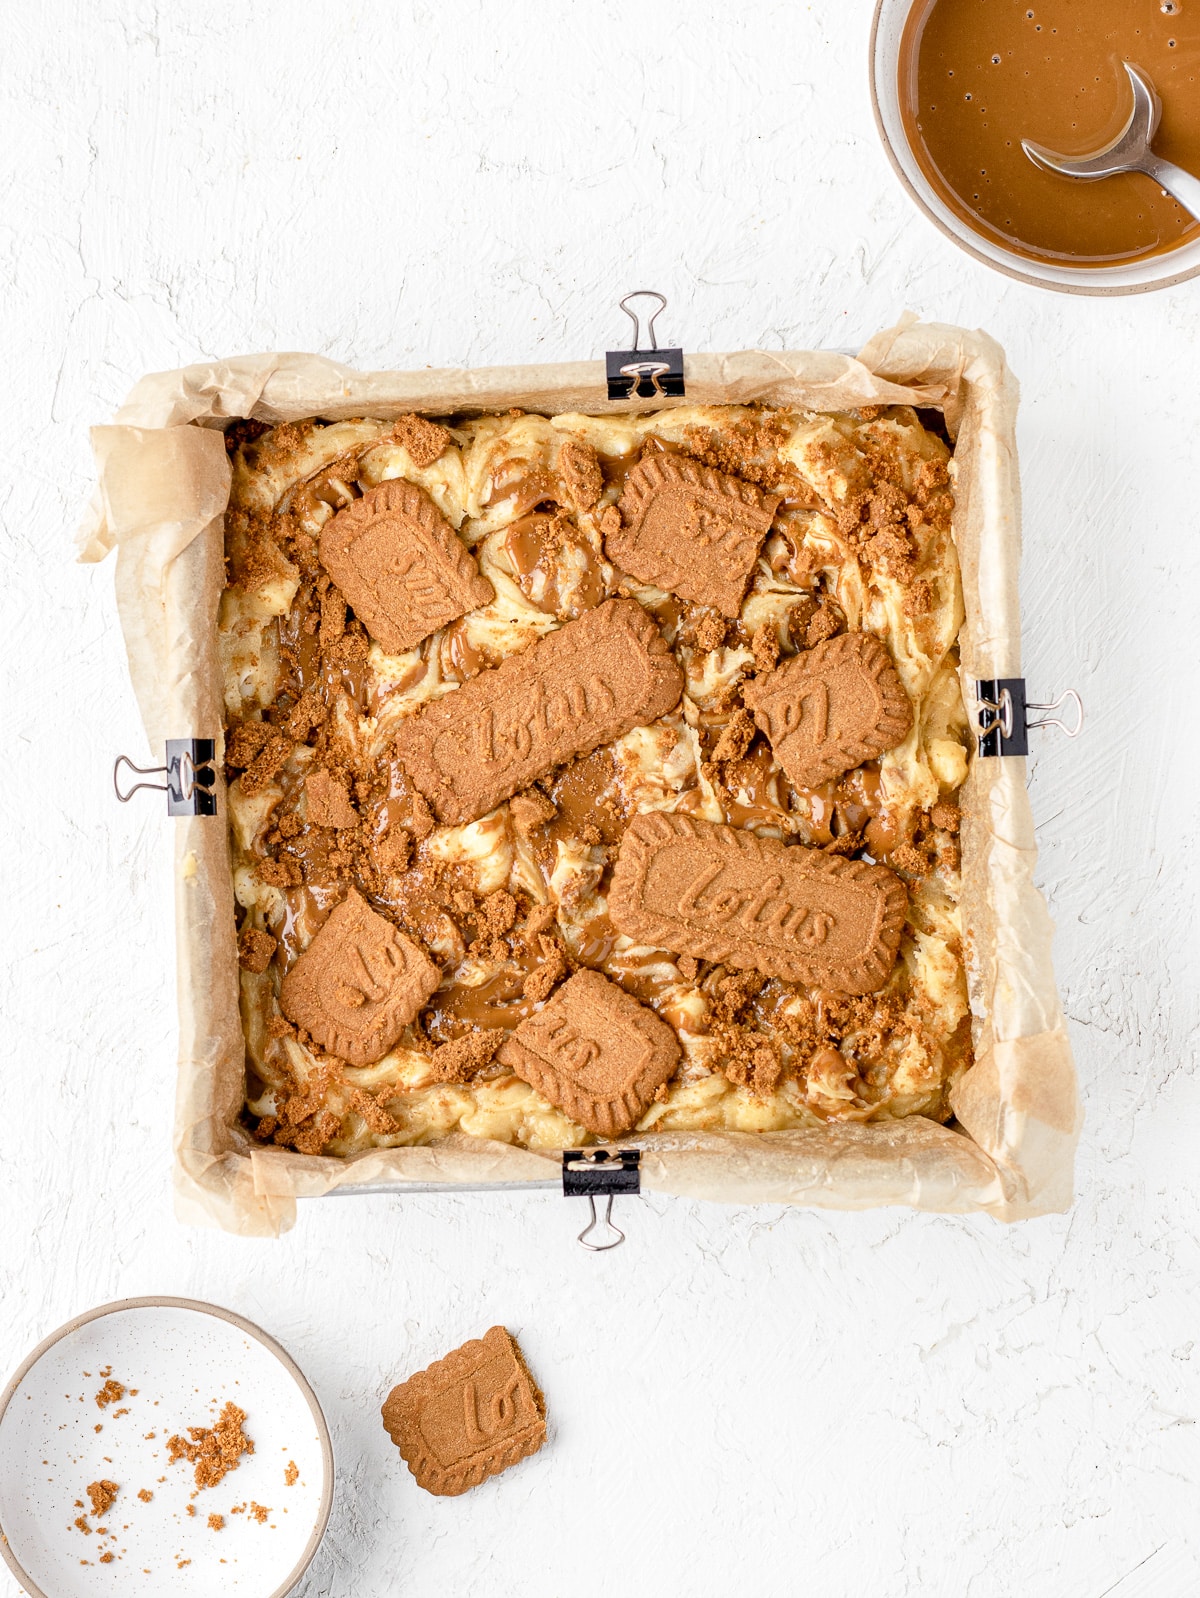 In a baking pan, the blondie batter with swirls of Biscoff cookie butter and crumbled Biscoff cookies.